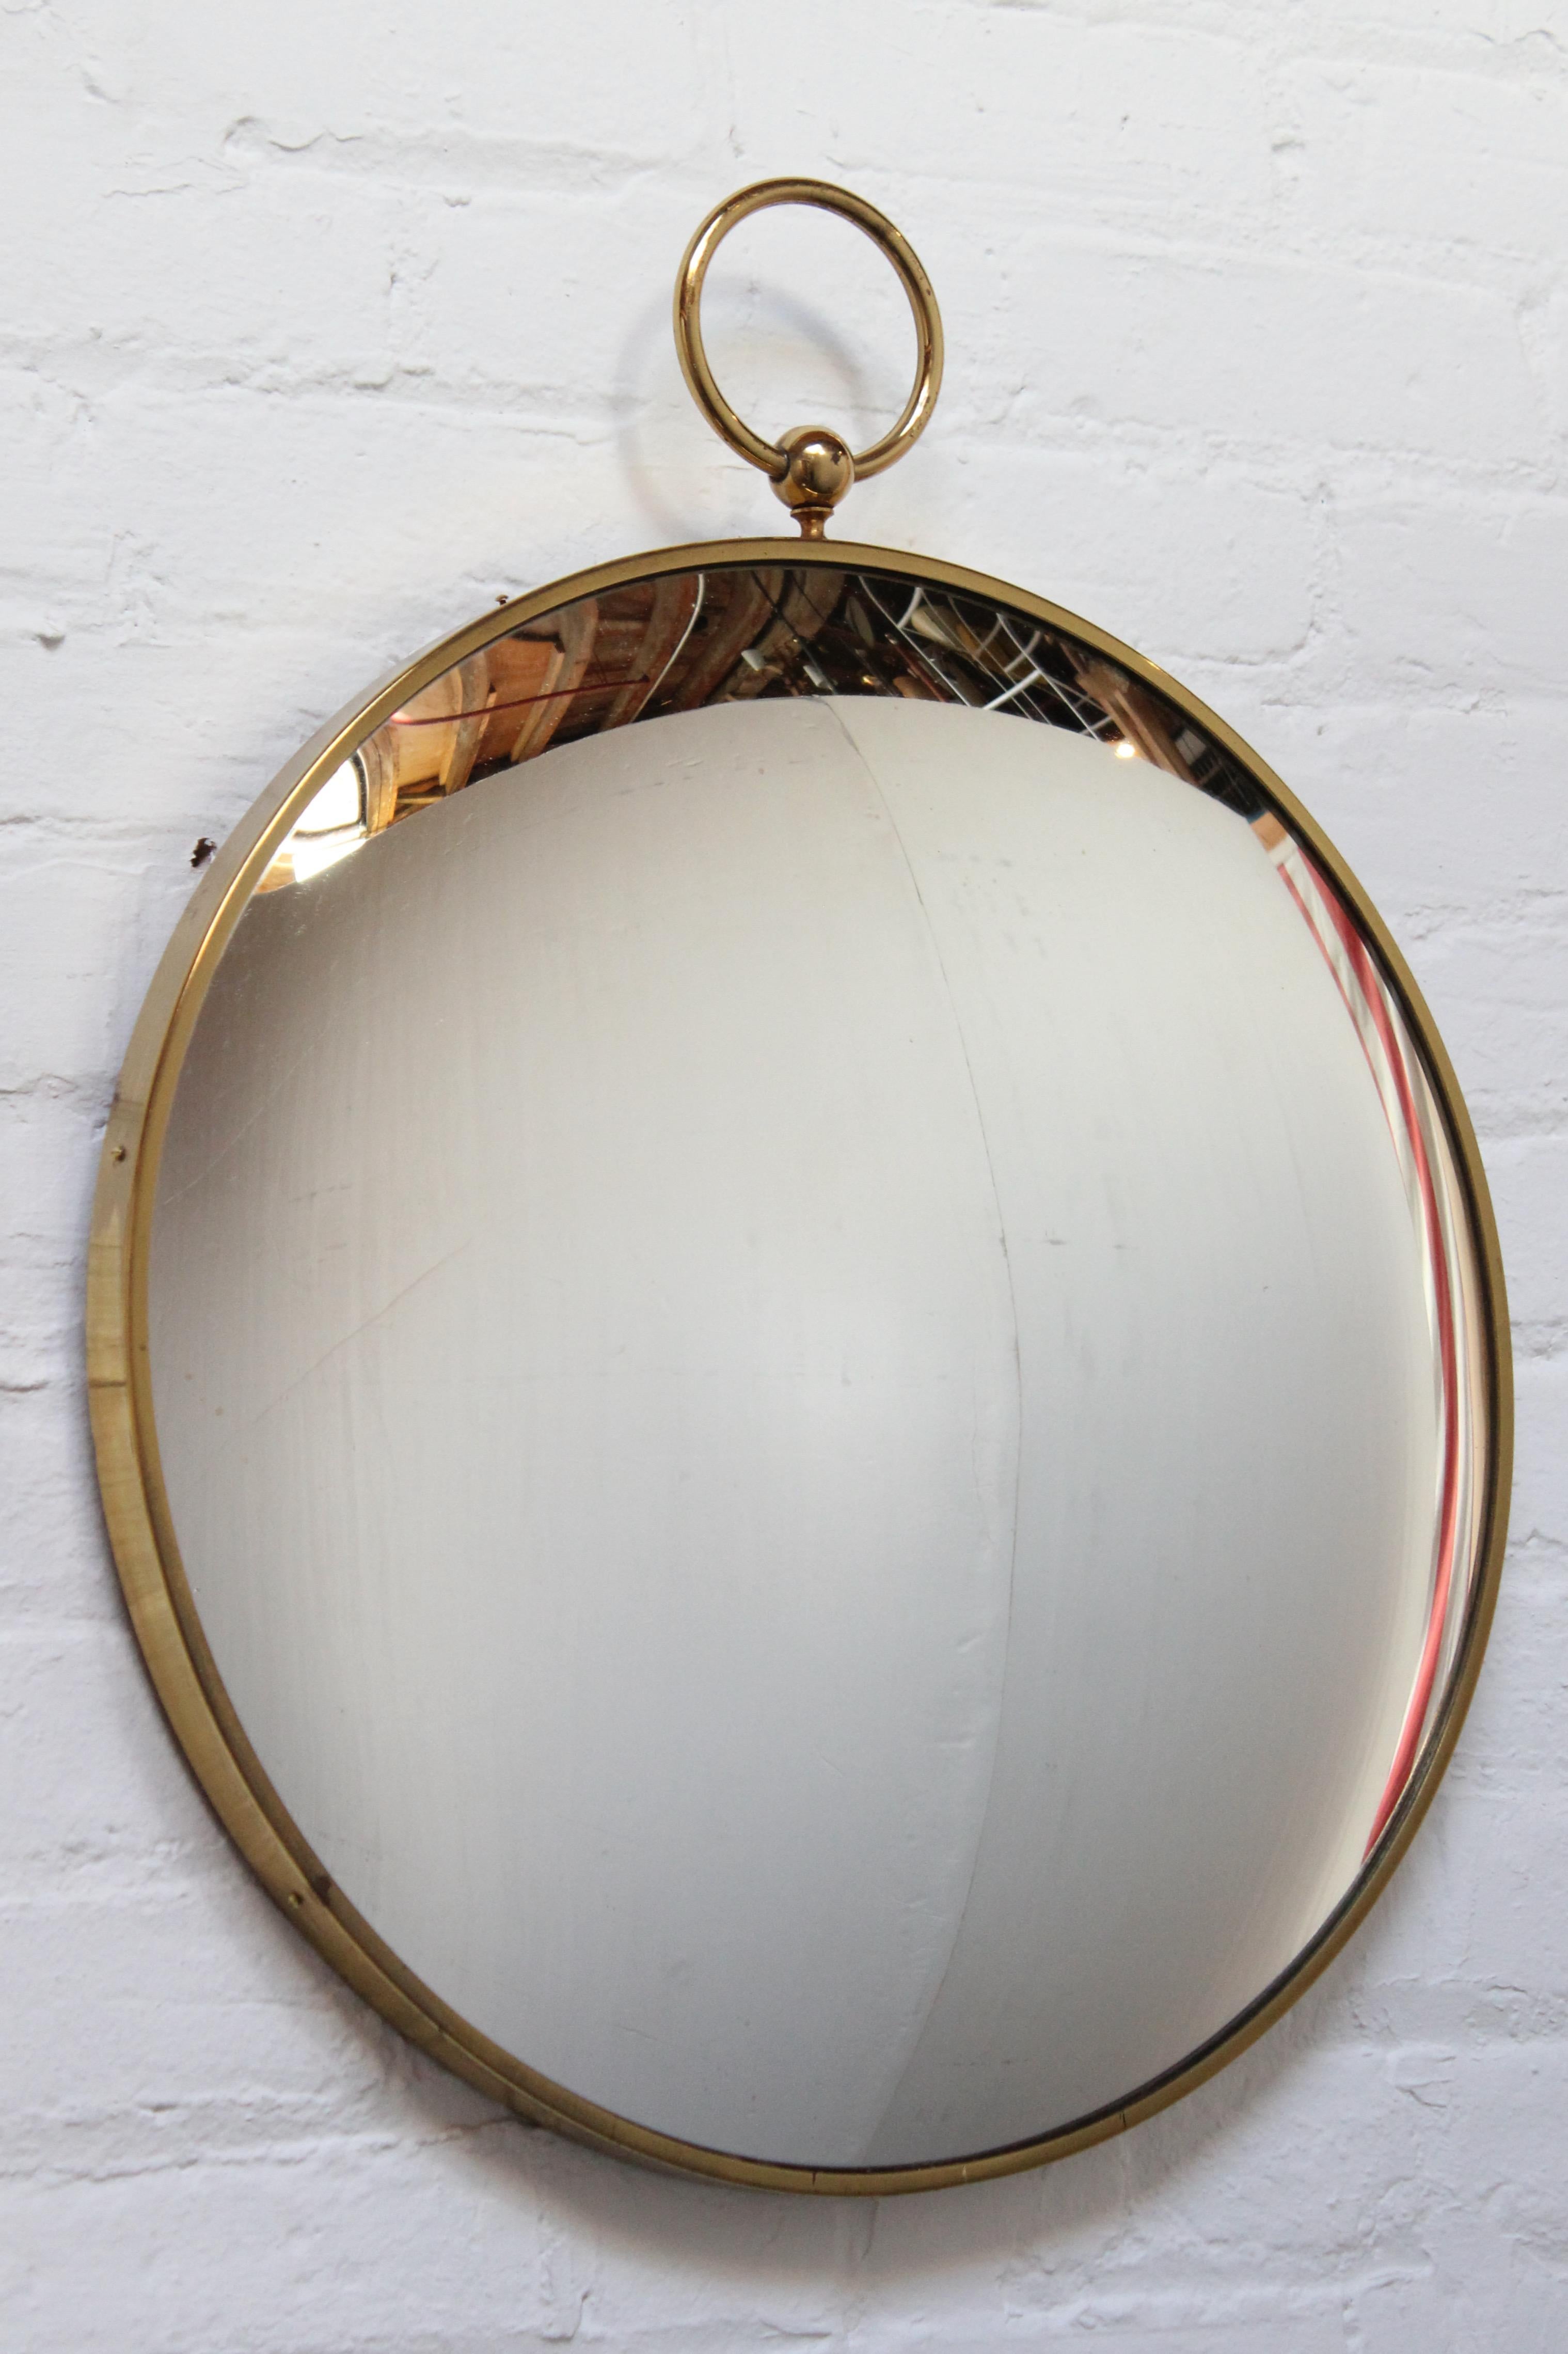 Pocket-watch form mirror in the style of Piero Fornasetti (ca. 1950s, Italy) composed of inset convex glass housed in a brass frame with a walnut backing. 
Patina / light tarnish / discoloration to the unpolished brass. There are a couple very